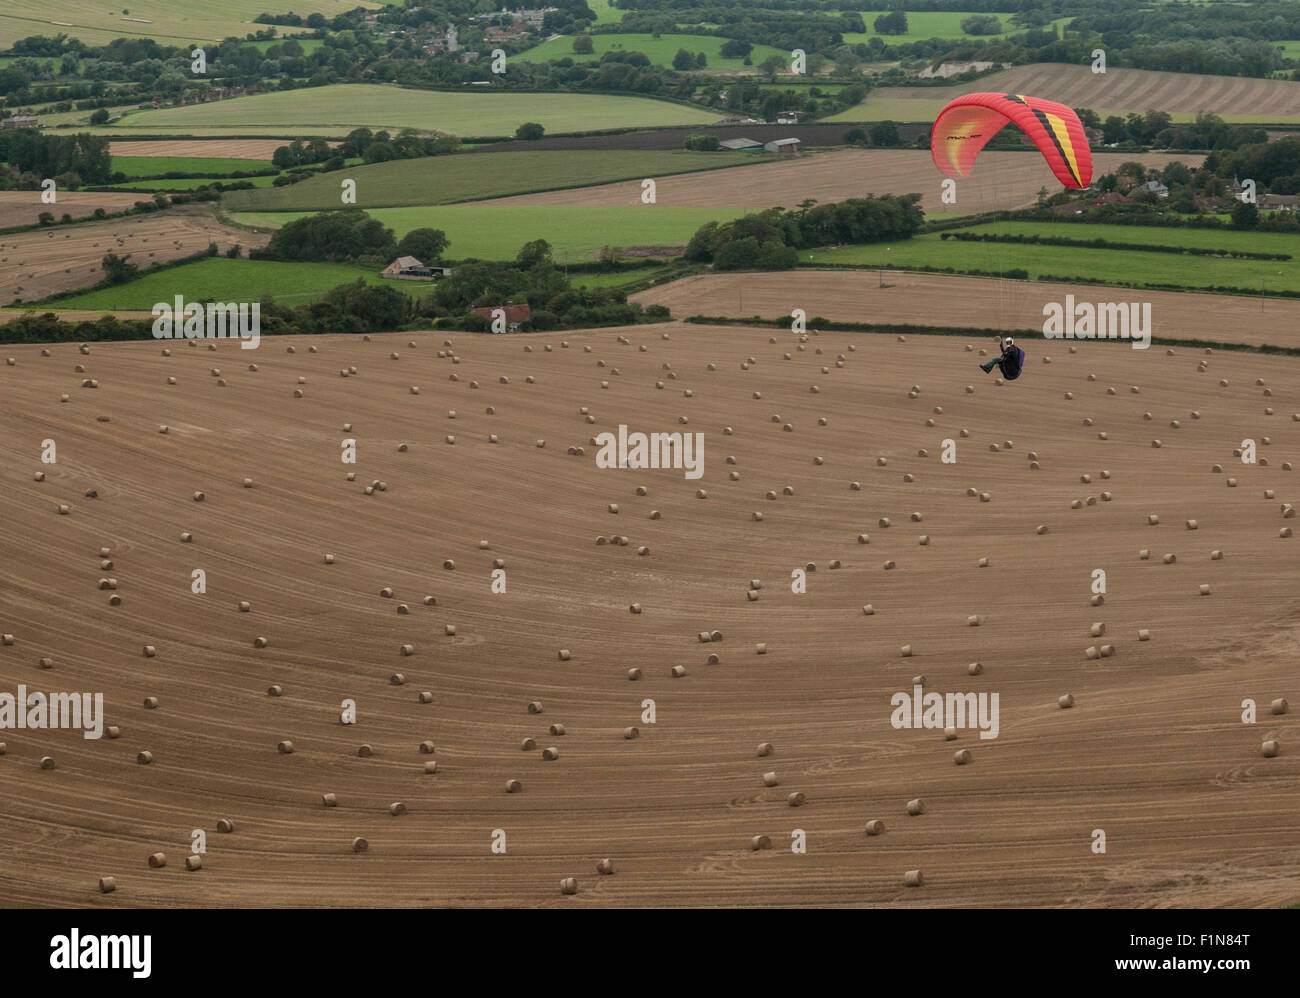 Firle Beacon, East Sussex, UK.4 September 2015.Overcast with a Northerly breeze make for good Paragliding conditions, if somewhat cooler, over the South Downs.. Stock Photo